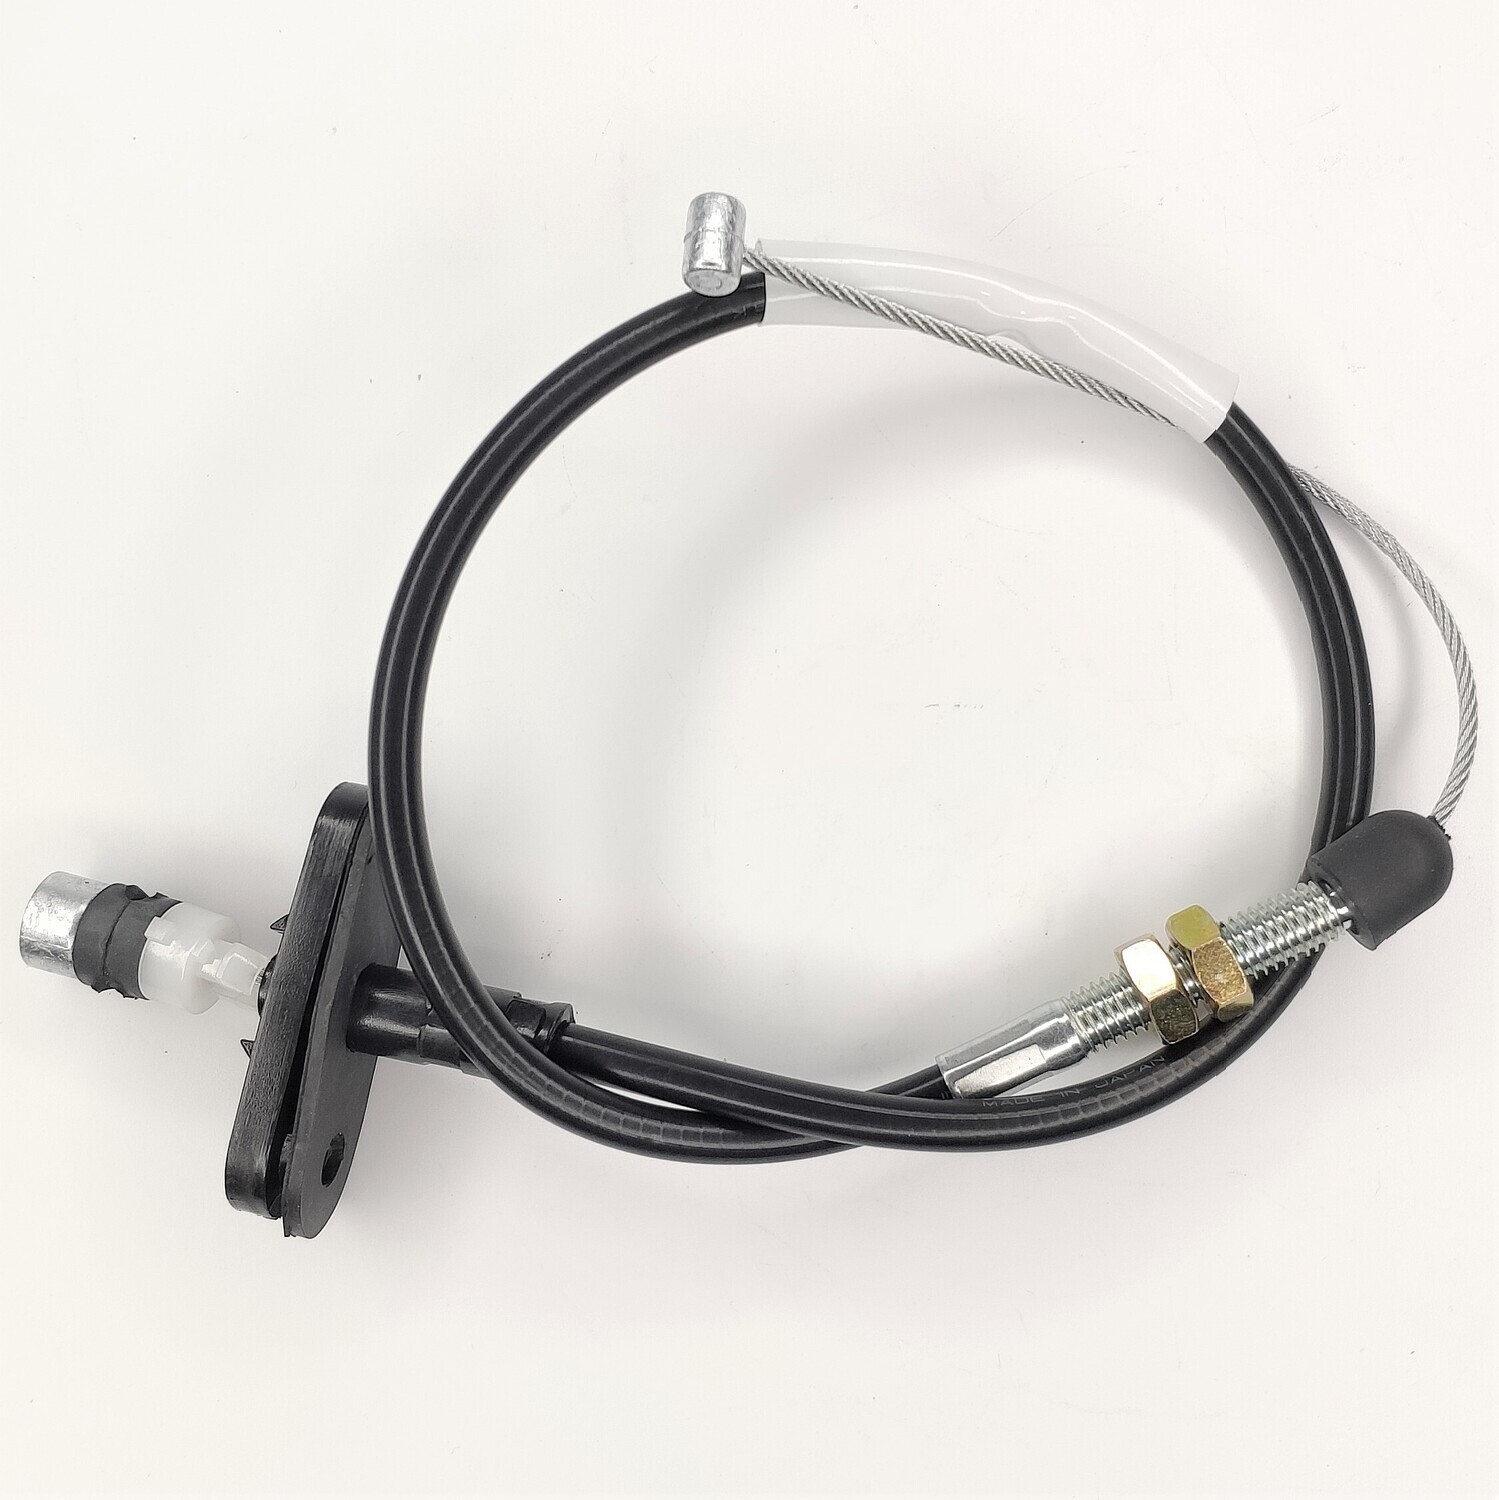 Accelerator Throttle Cable Fits Toyota Corolla 4K